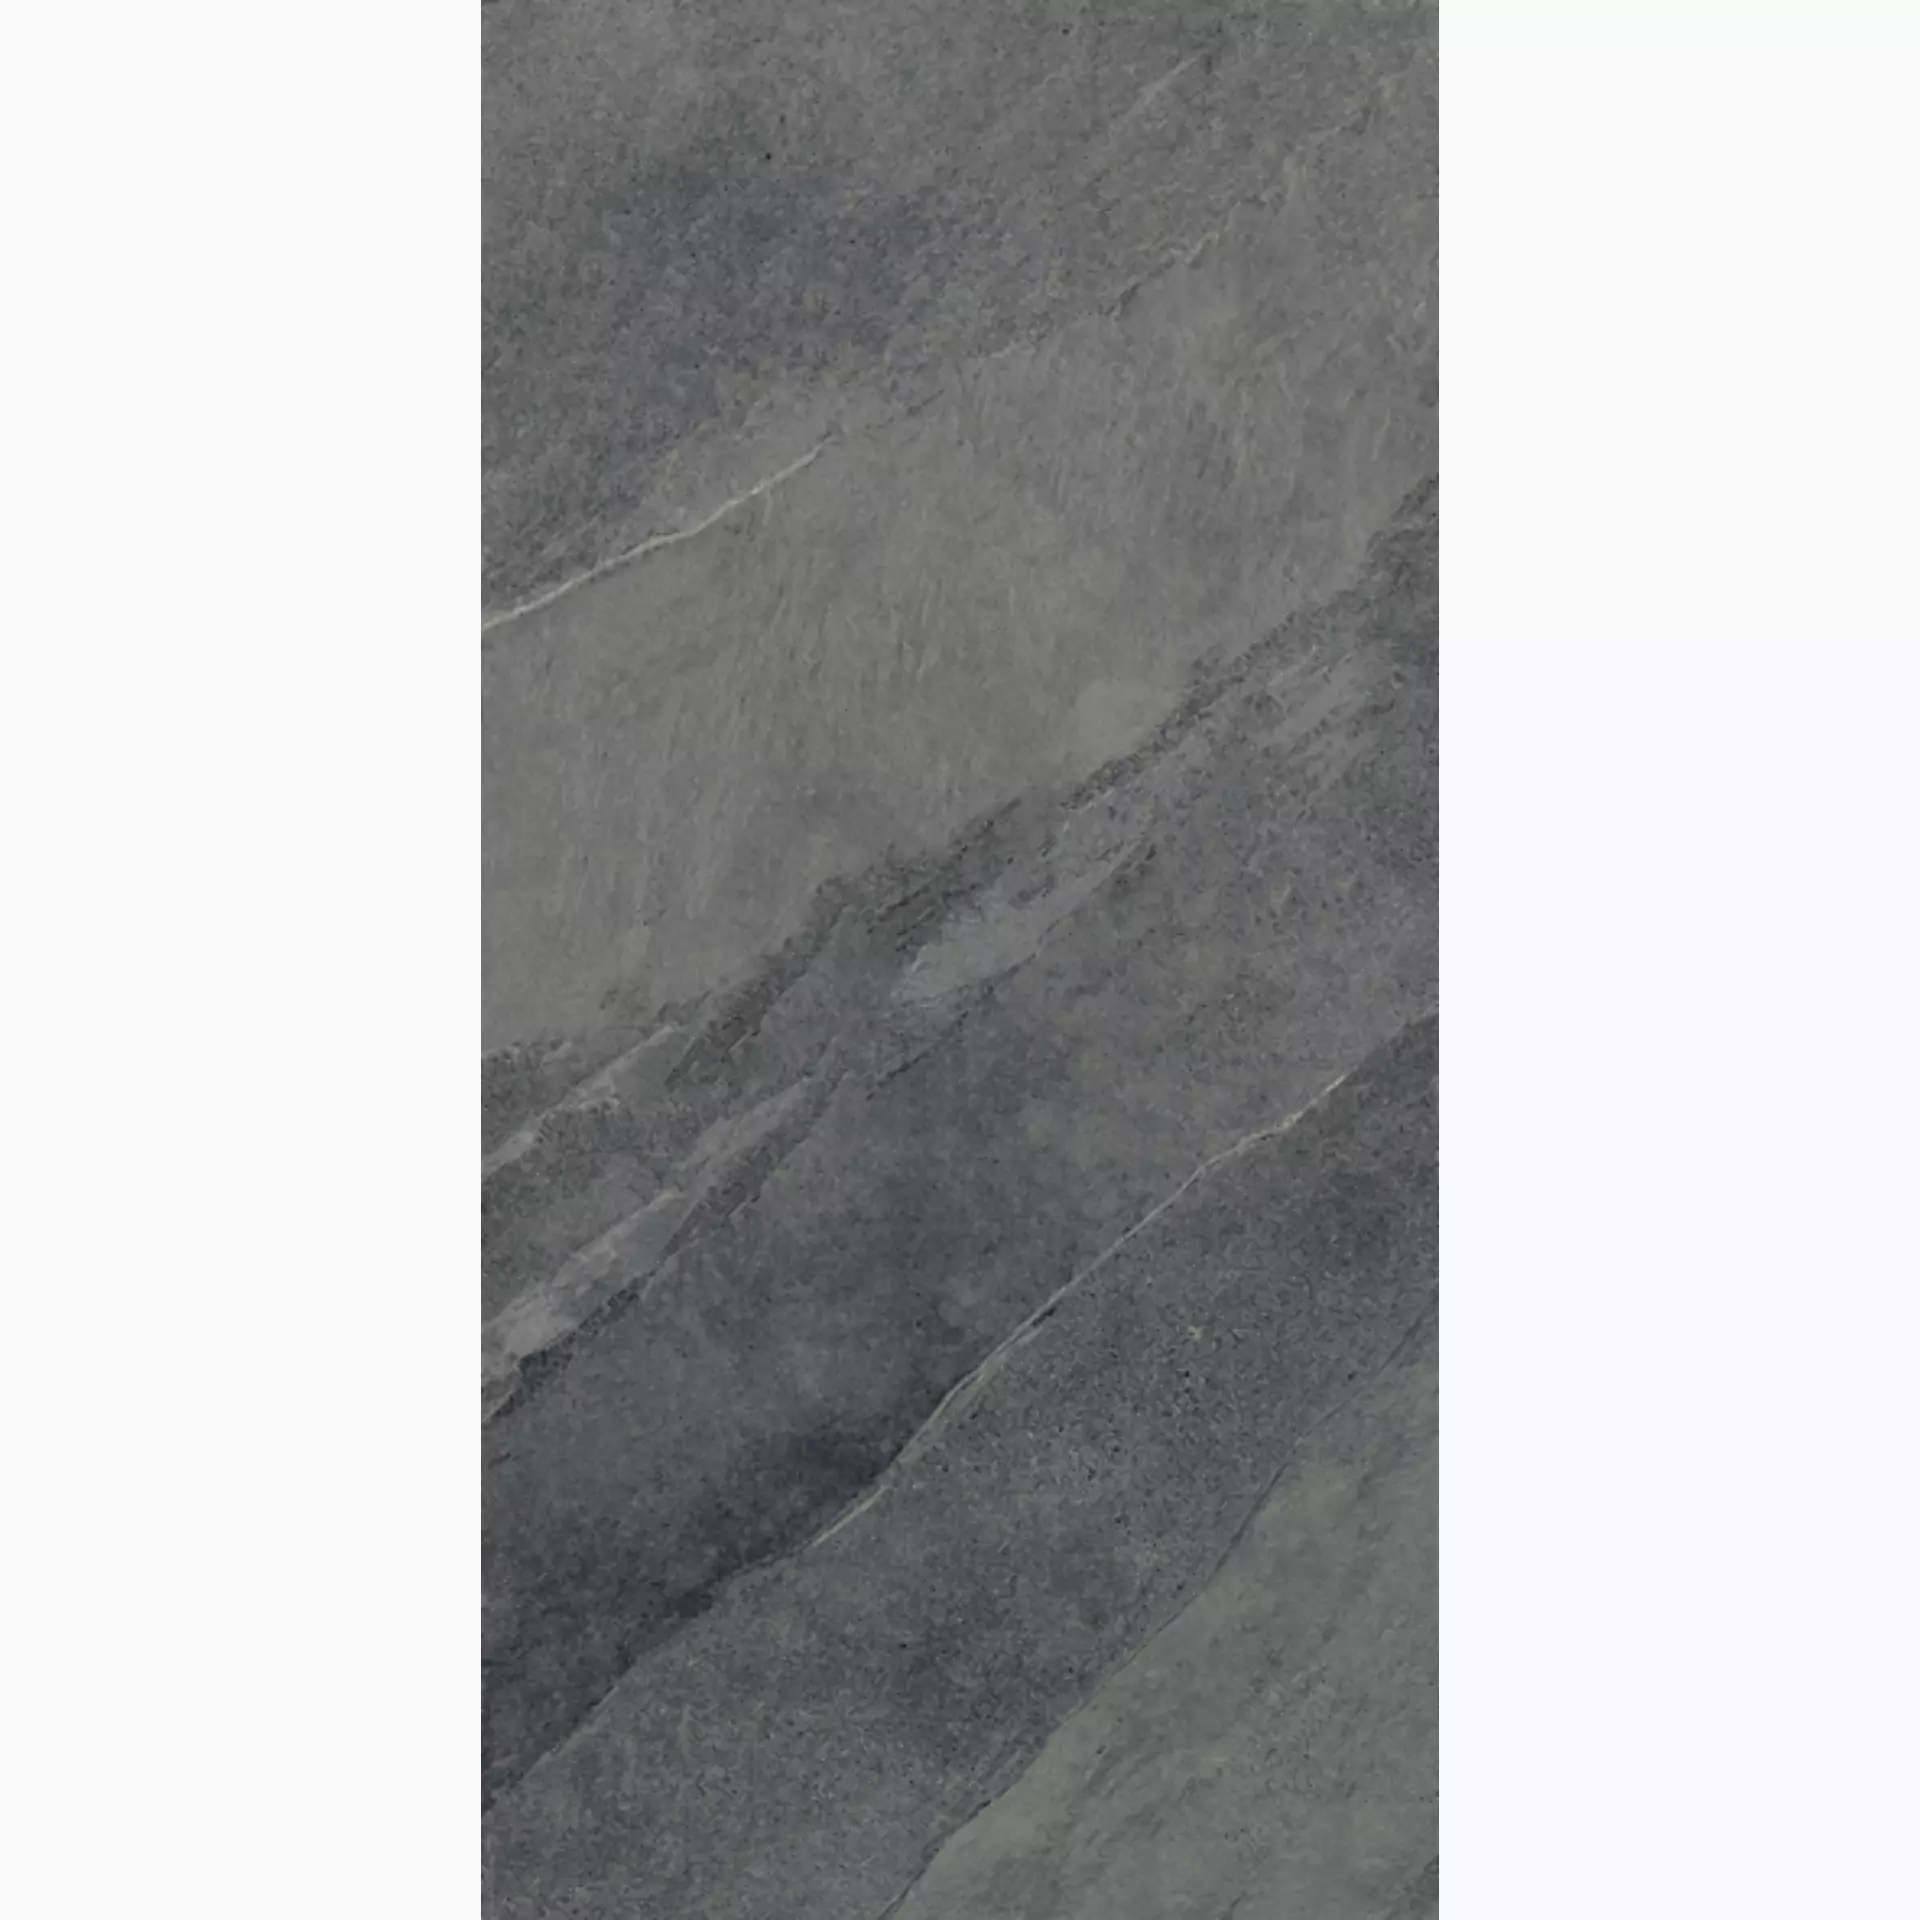 Keope Ubik Anthracite Strutturato 46475731 60x120cm rectified 20mm